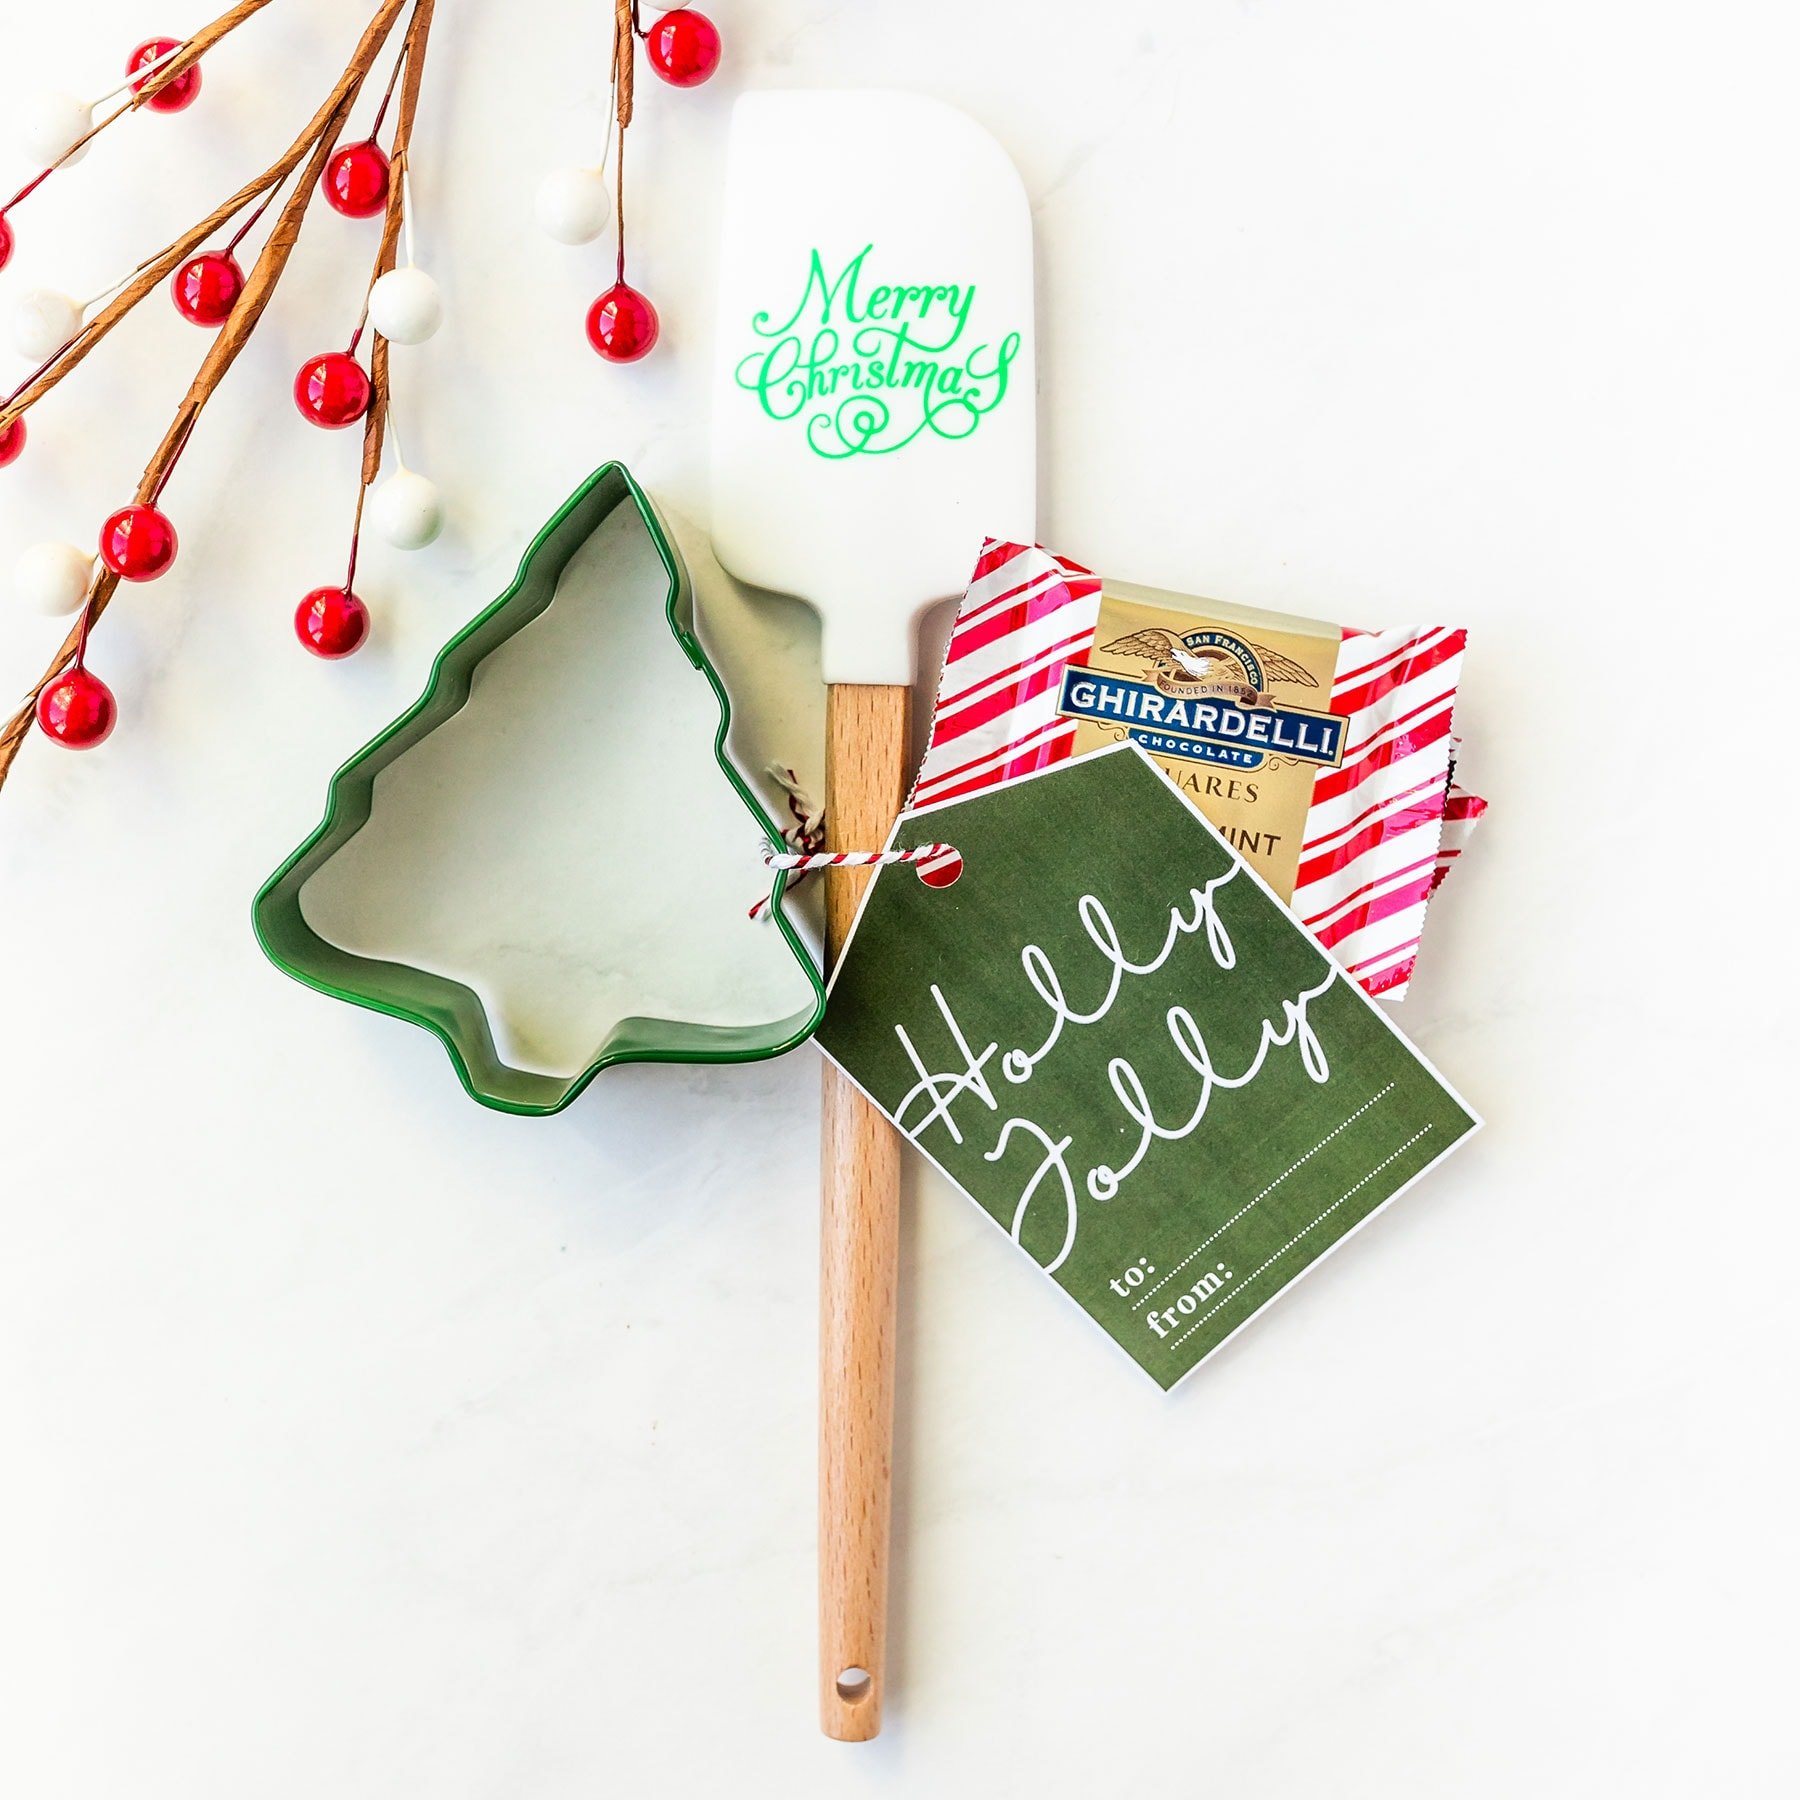 Easy Christmas Party Favors - Handle the Heat